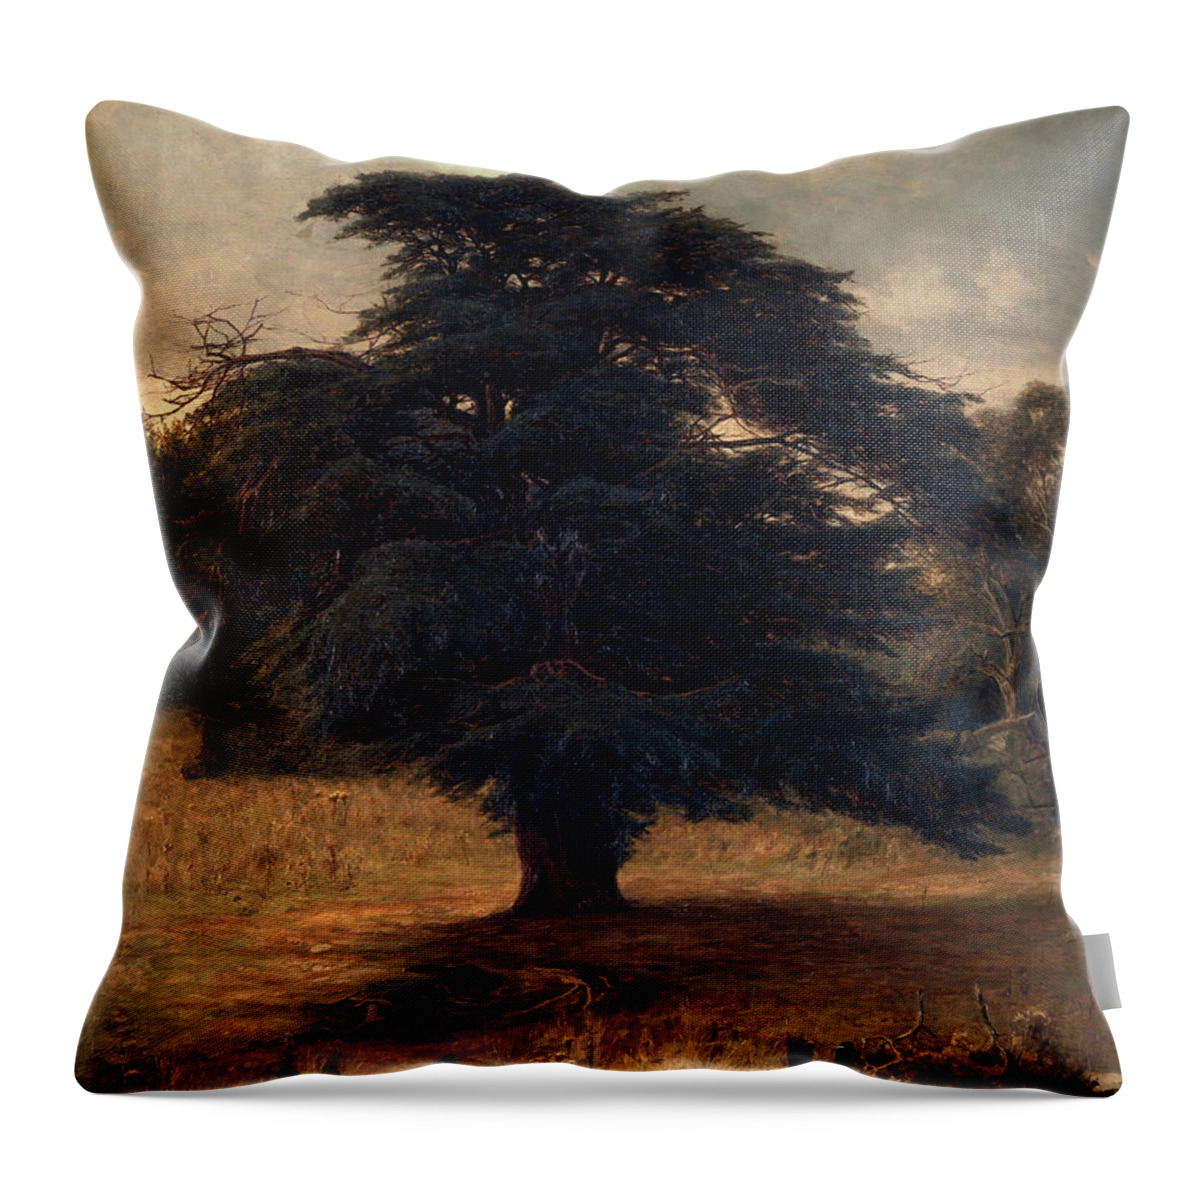 Frank Walton United Kingdom 1840-1928 Peace At The Last Throw Pillow featuring the painting Frank Walton United Kingdom by MotionAge Designs